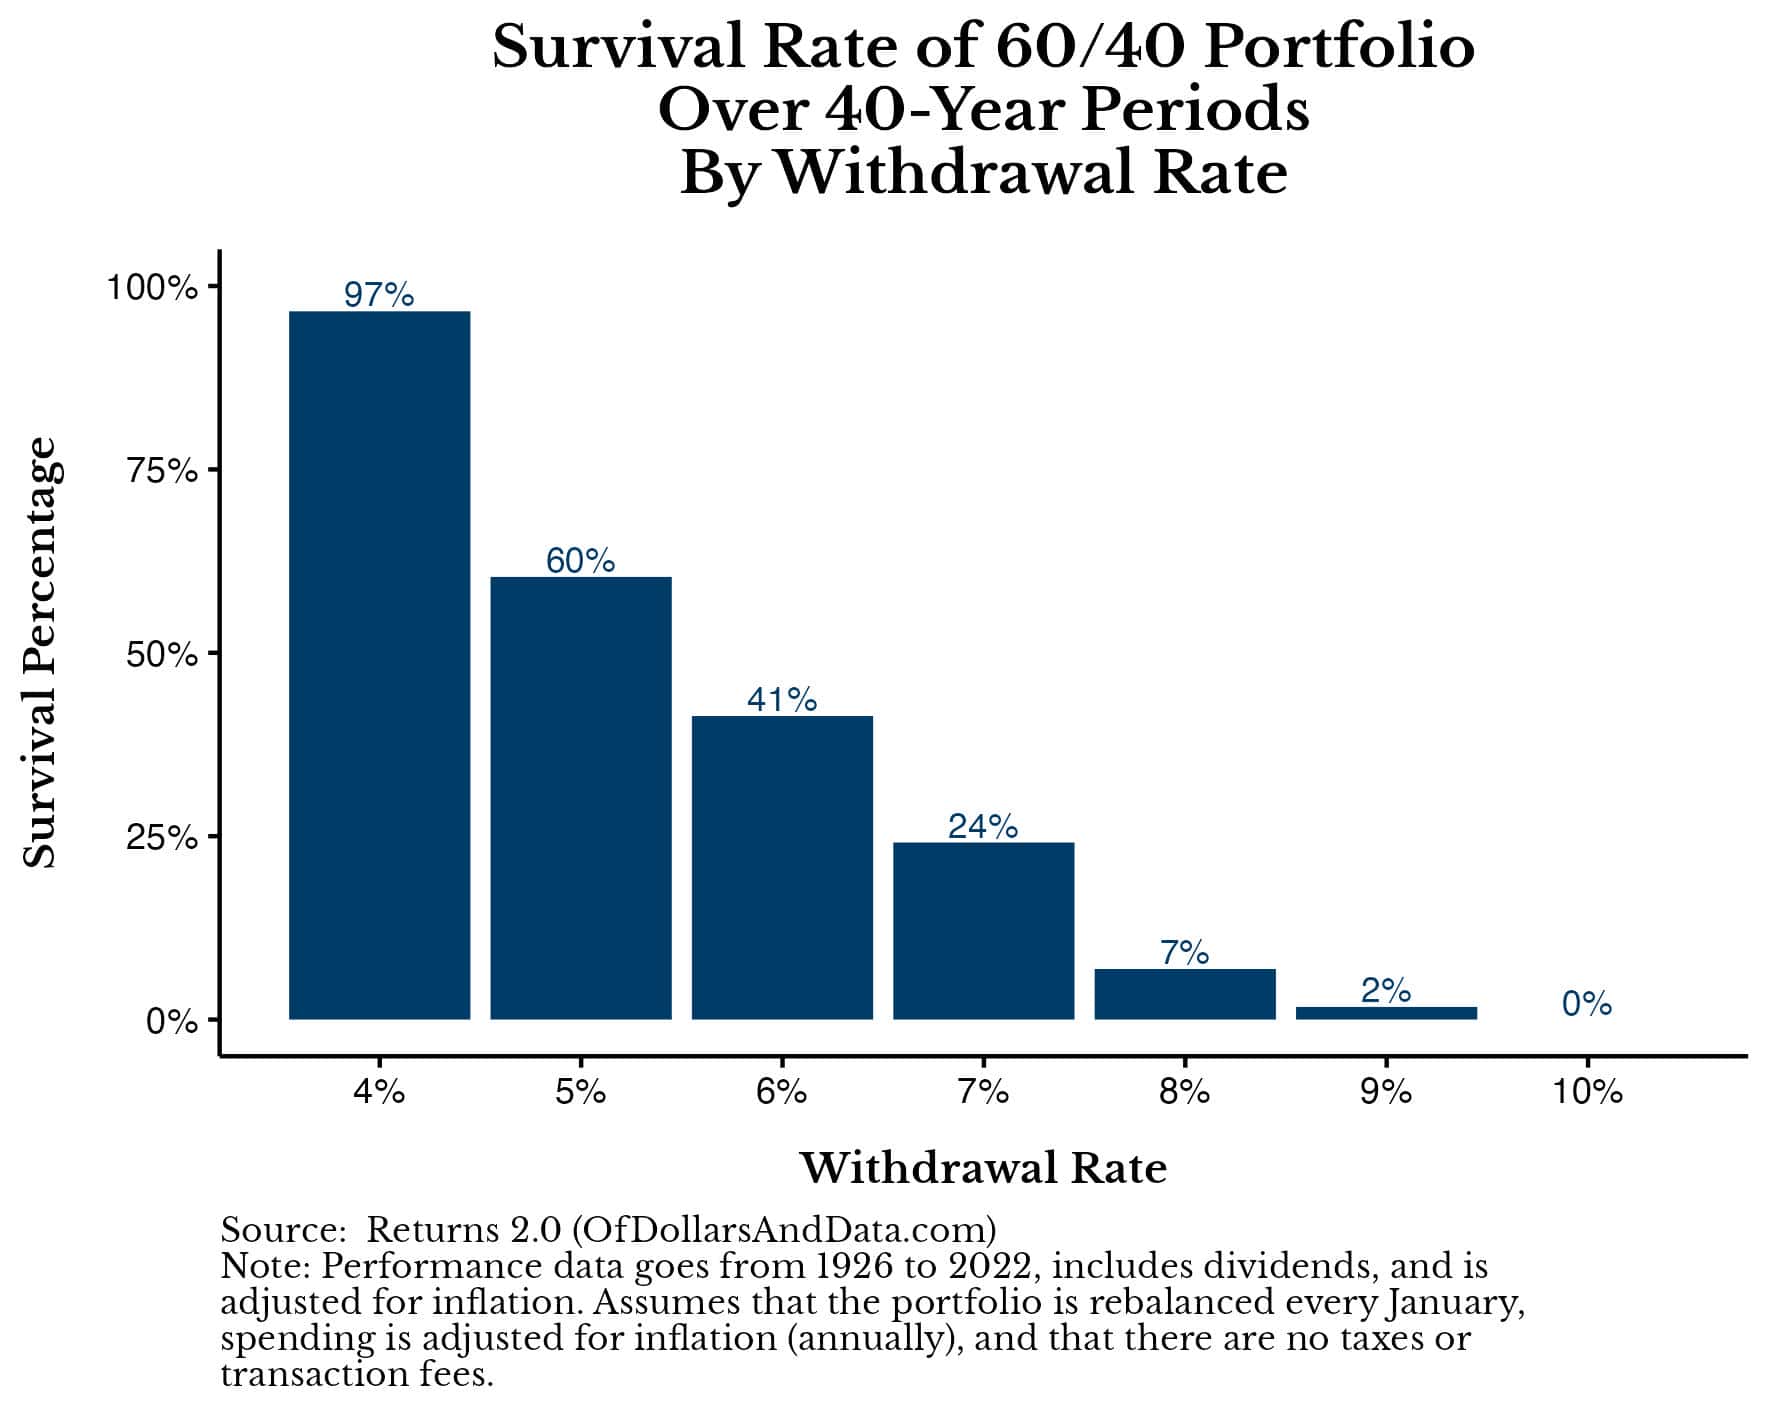 Chart showing the safe withdrawal rate simulations results over a 40-year time horizon for a 60/40 portfolio.